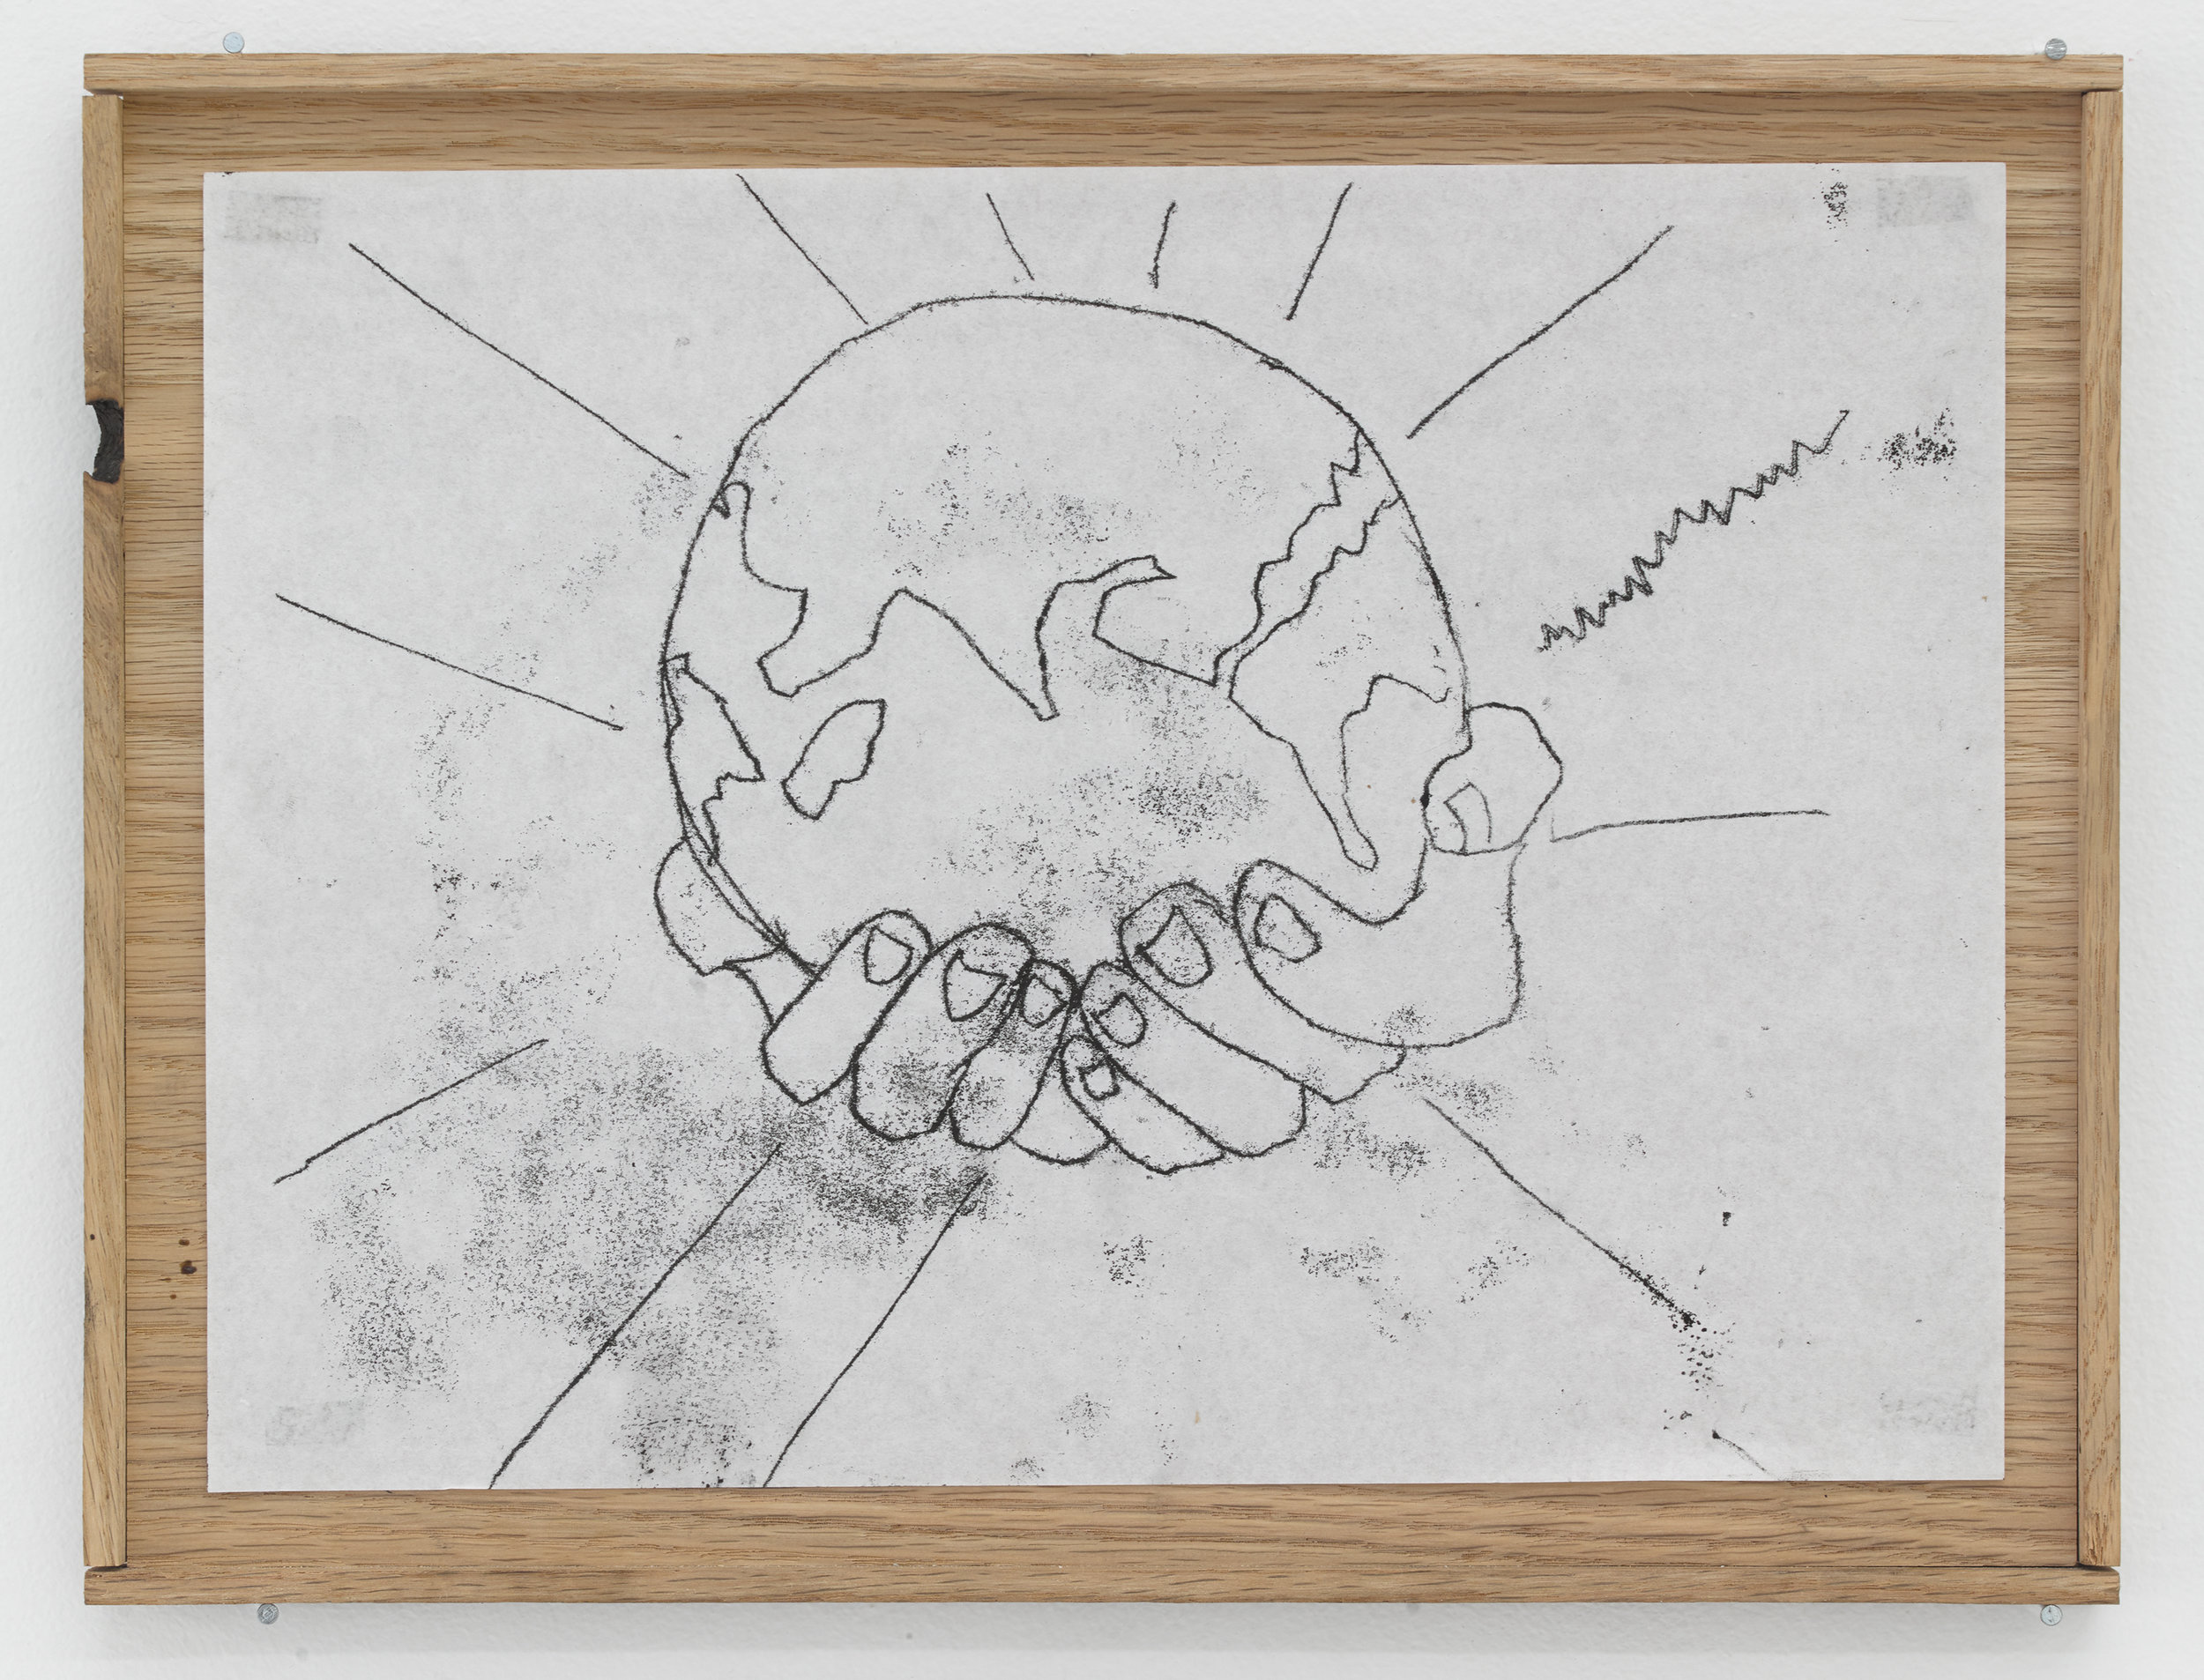  Maddy Parrasch,  Untitled (The World) , 2018, Ink monoprint in artist-made wooden frame 9 1/4 × 12 3/4 inches   